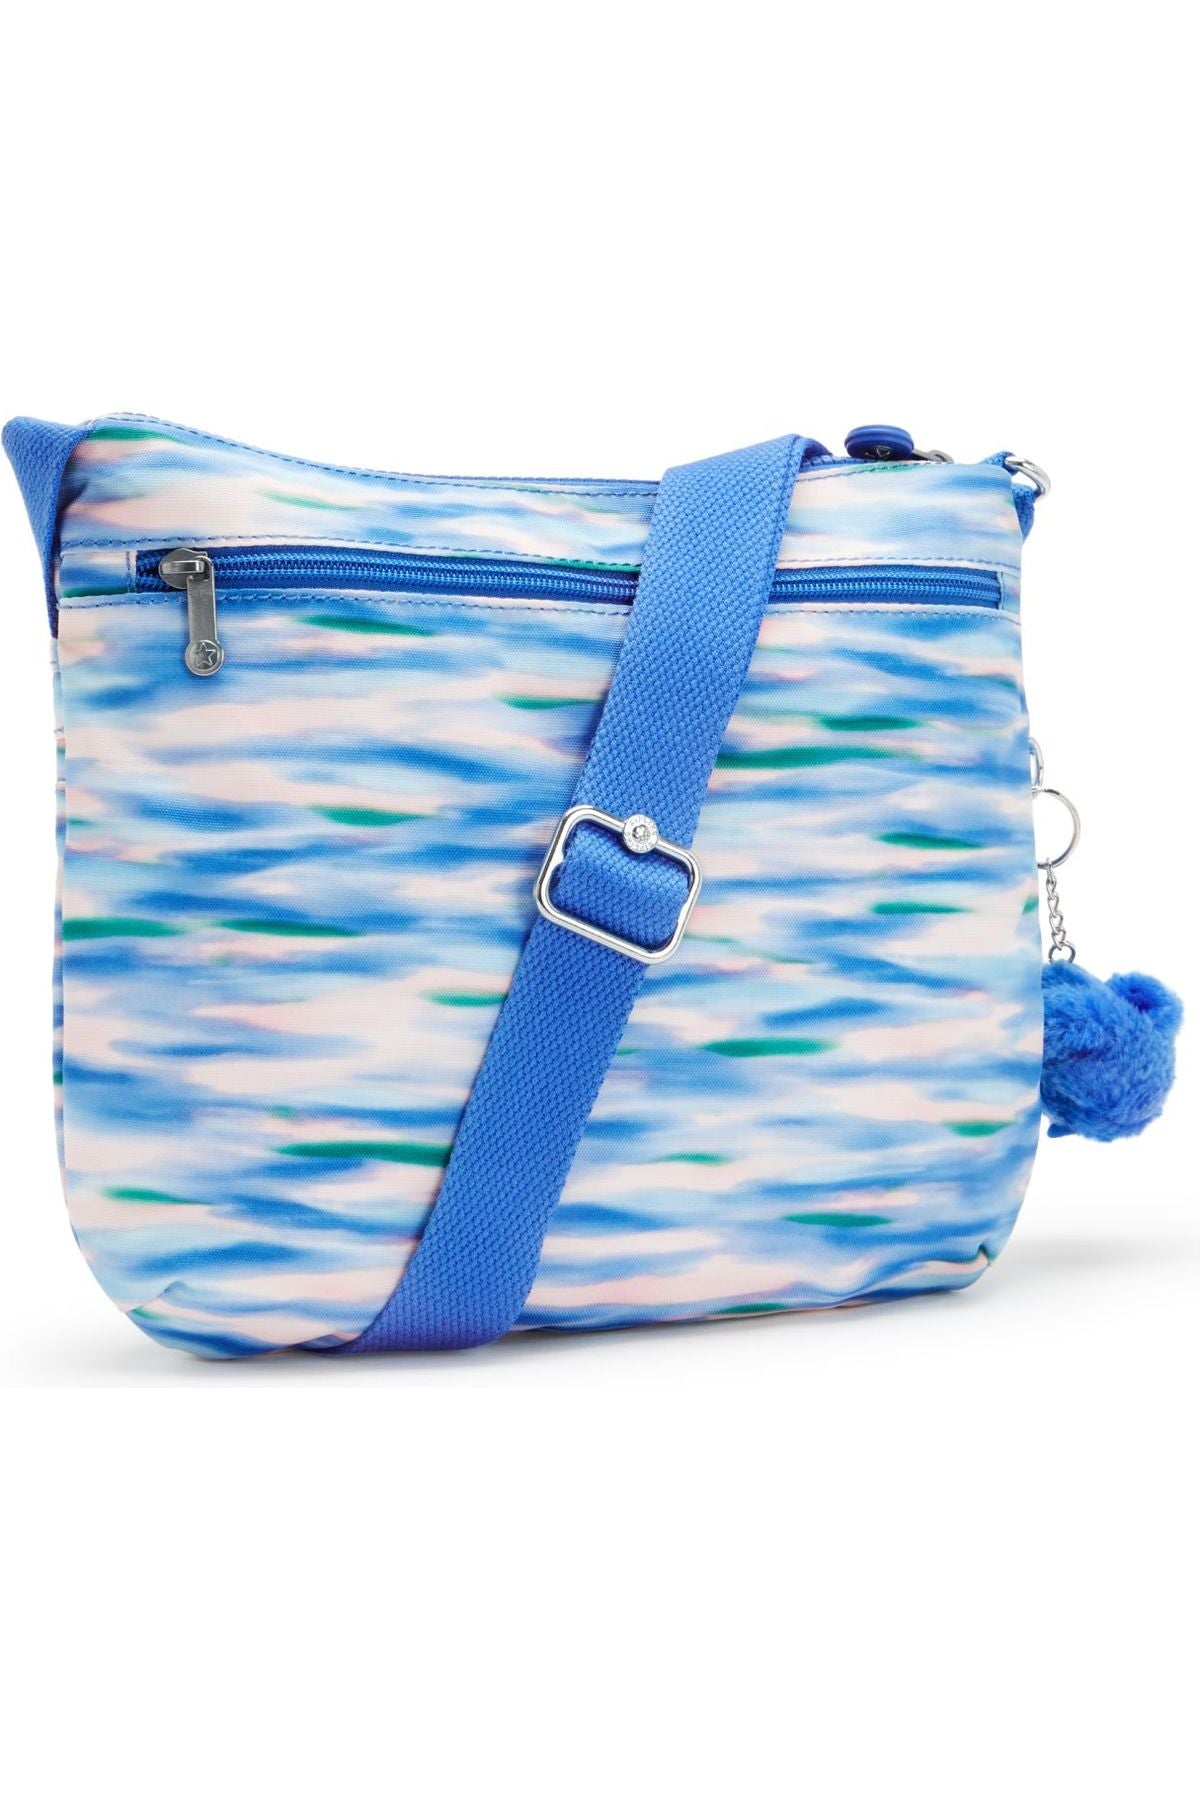 Kipling Arto in Diluted Blue